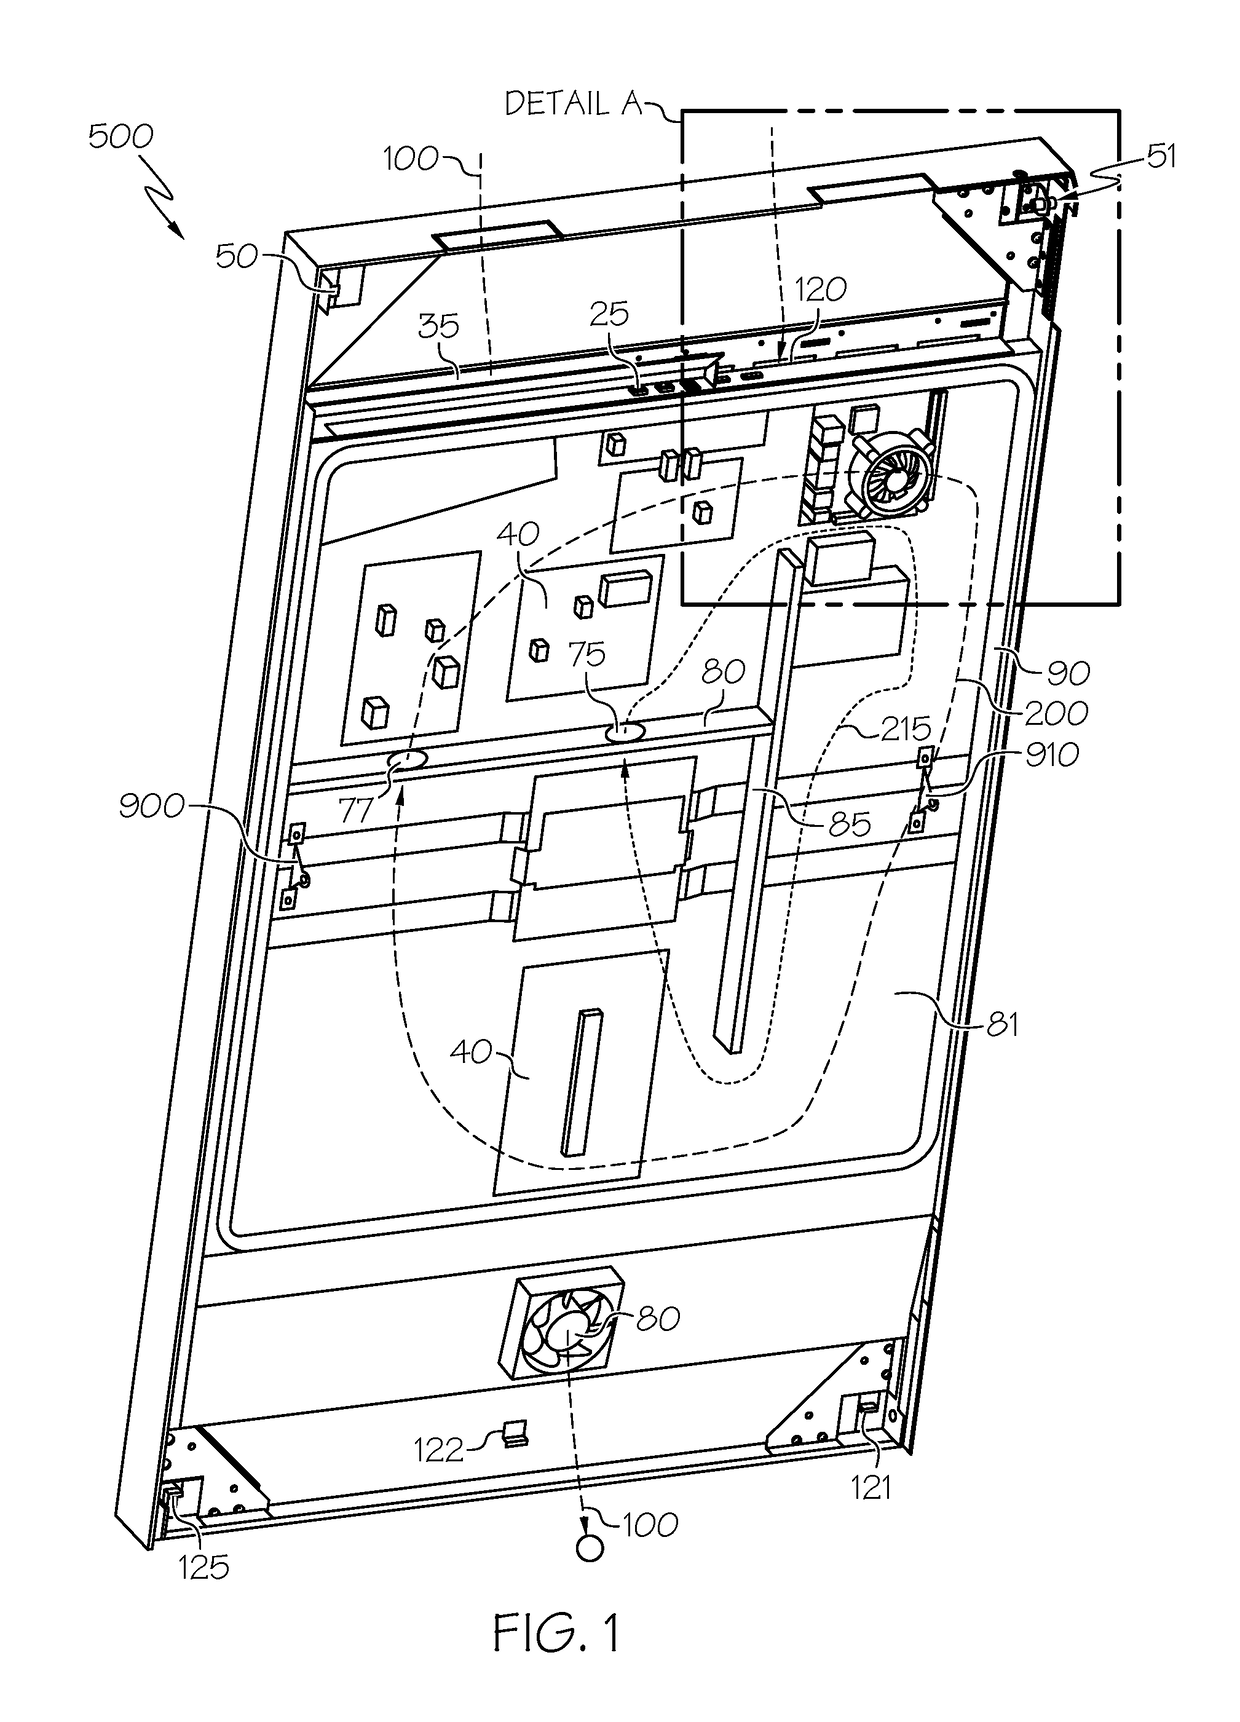 Hybrid rear cover and mounting bracket for electronic display